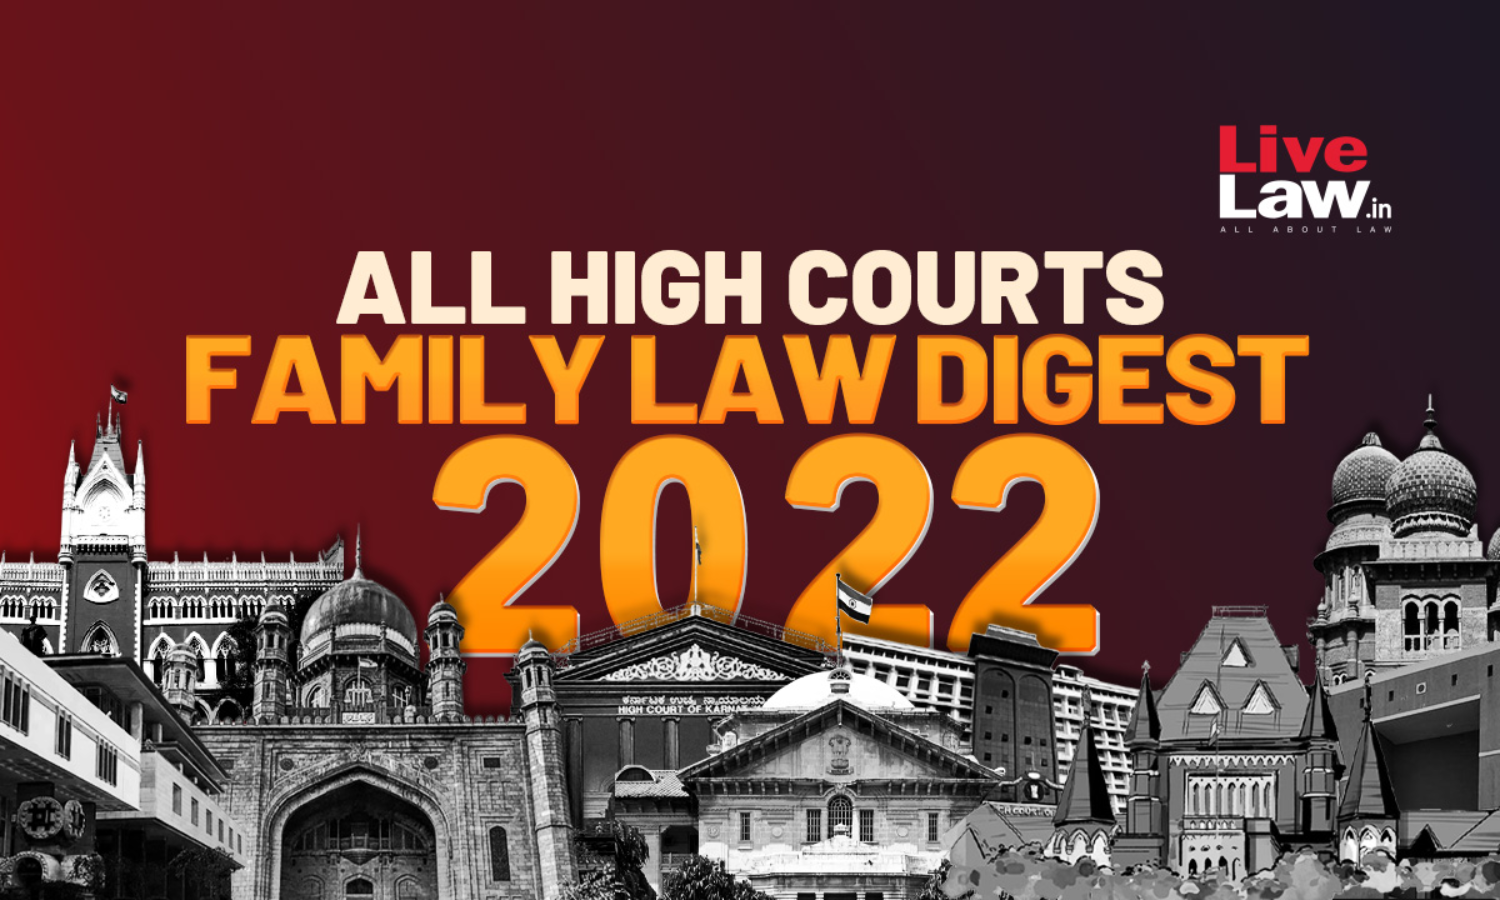 Anita Bai Xxx Video - All High Courts Family Law Digest 2022